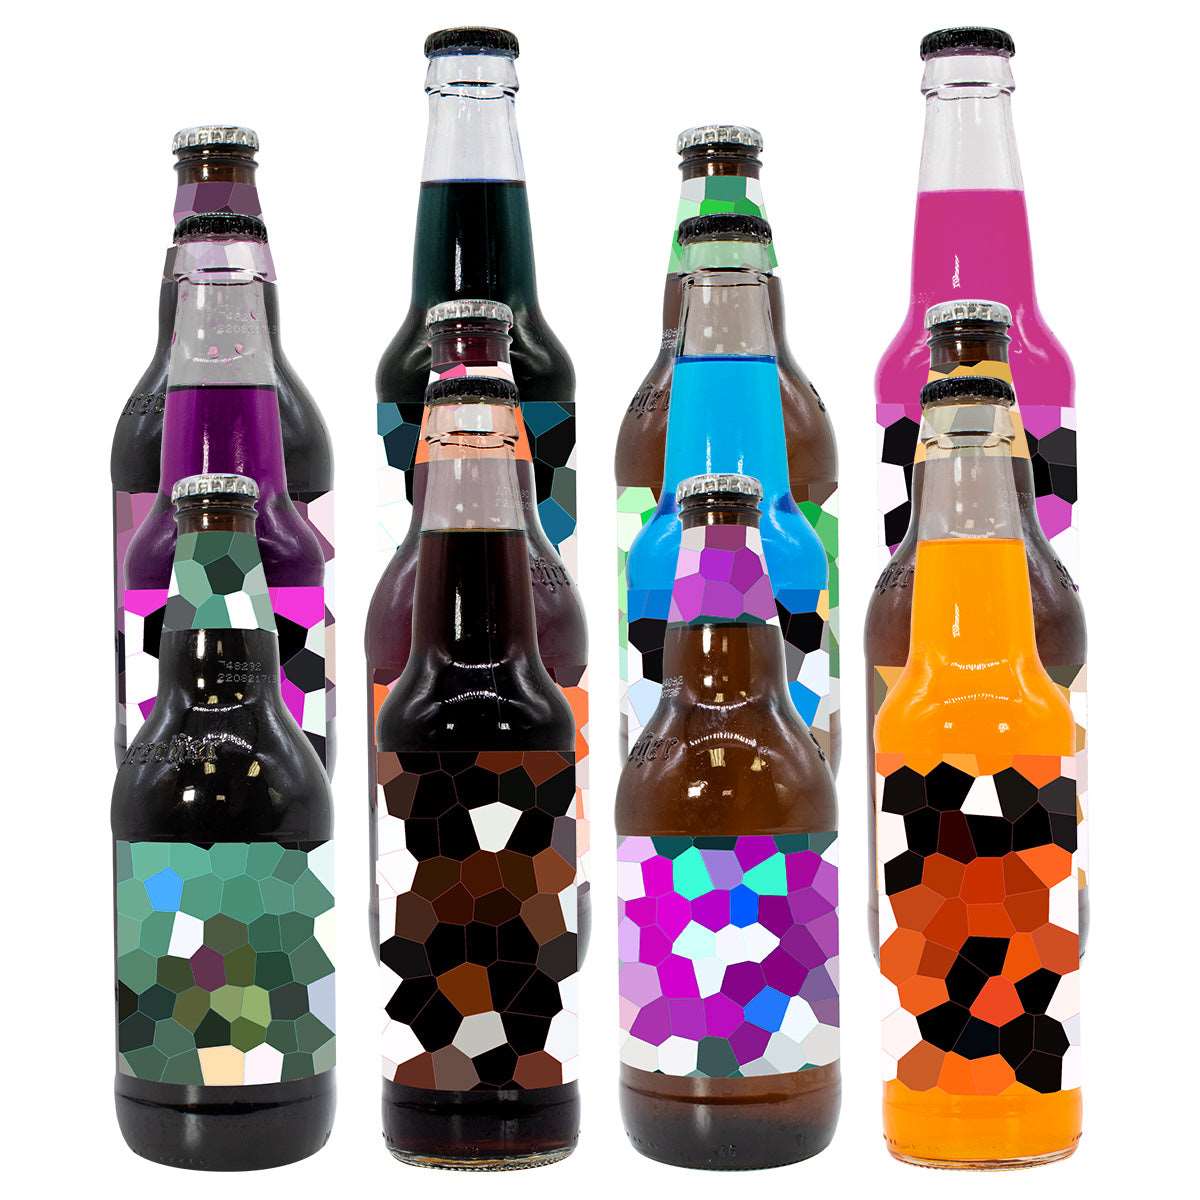 An assortment of 12 and 16oz bottles of Sprecher soda with blurred labels